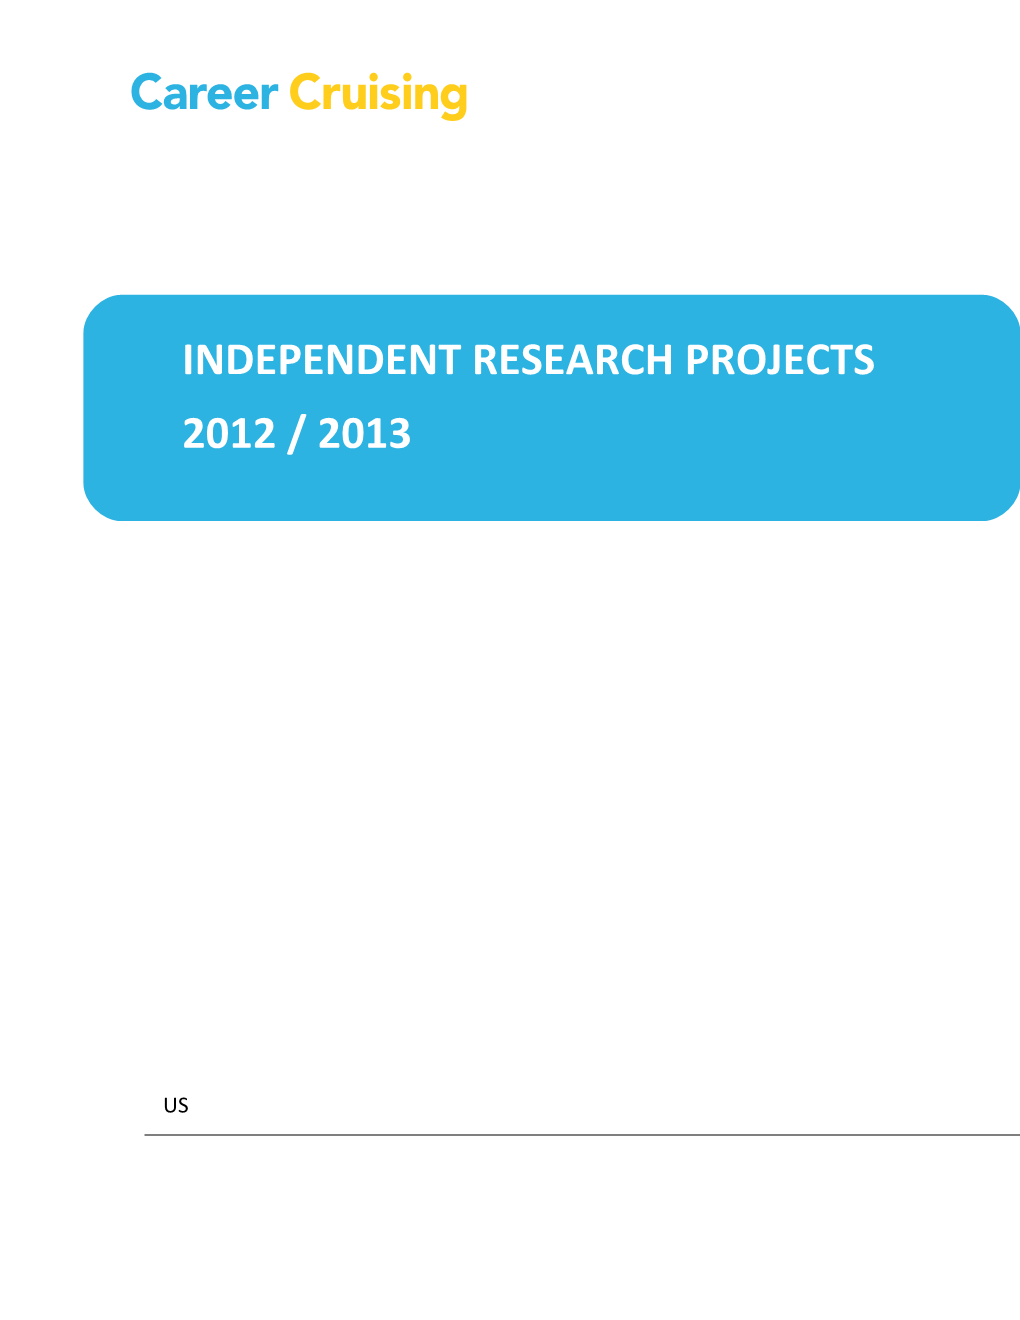 About the Independent Research Projects